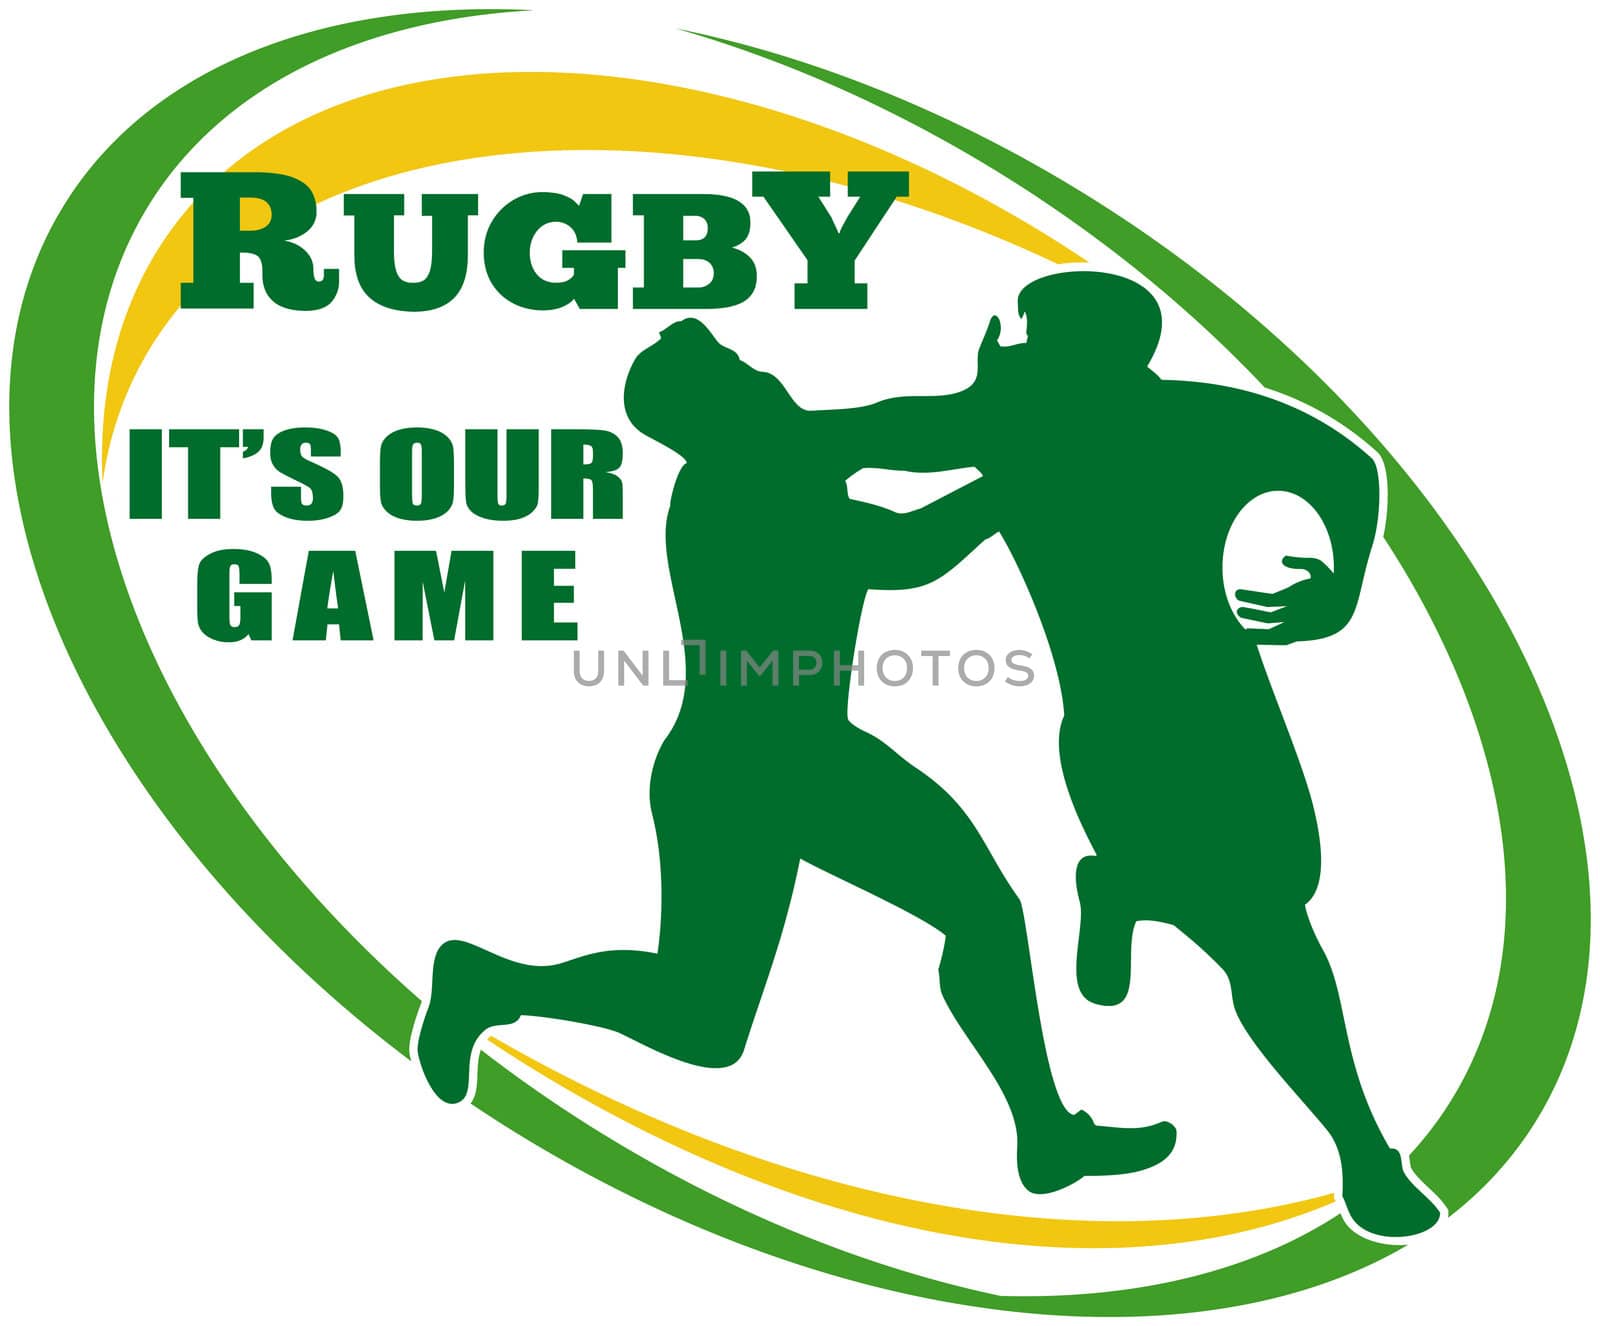 illustration of a Rugby player running fending off tackle with ball shape in background and words "rugby it's our game"